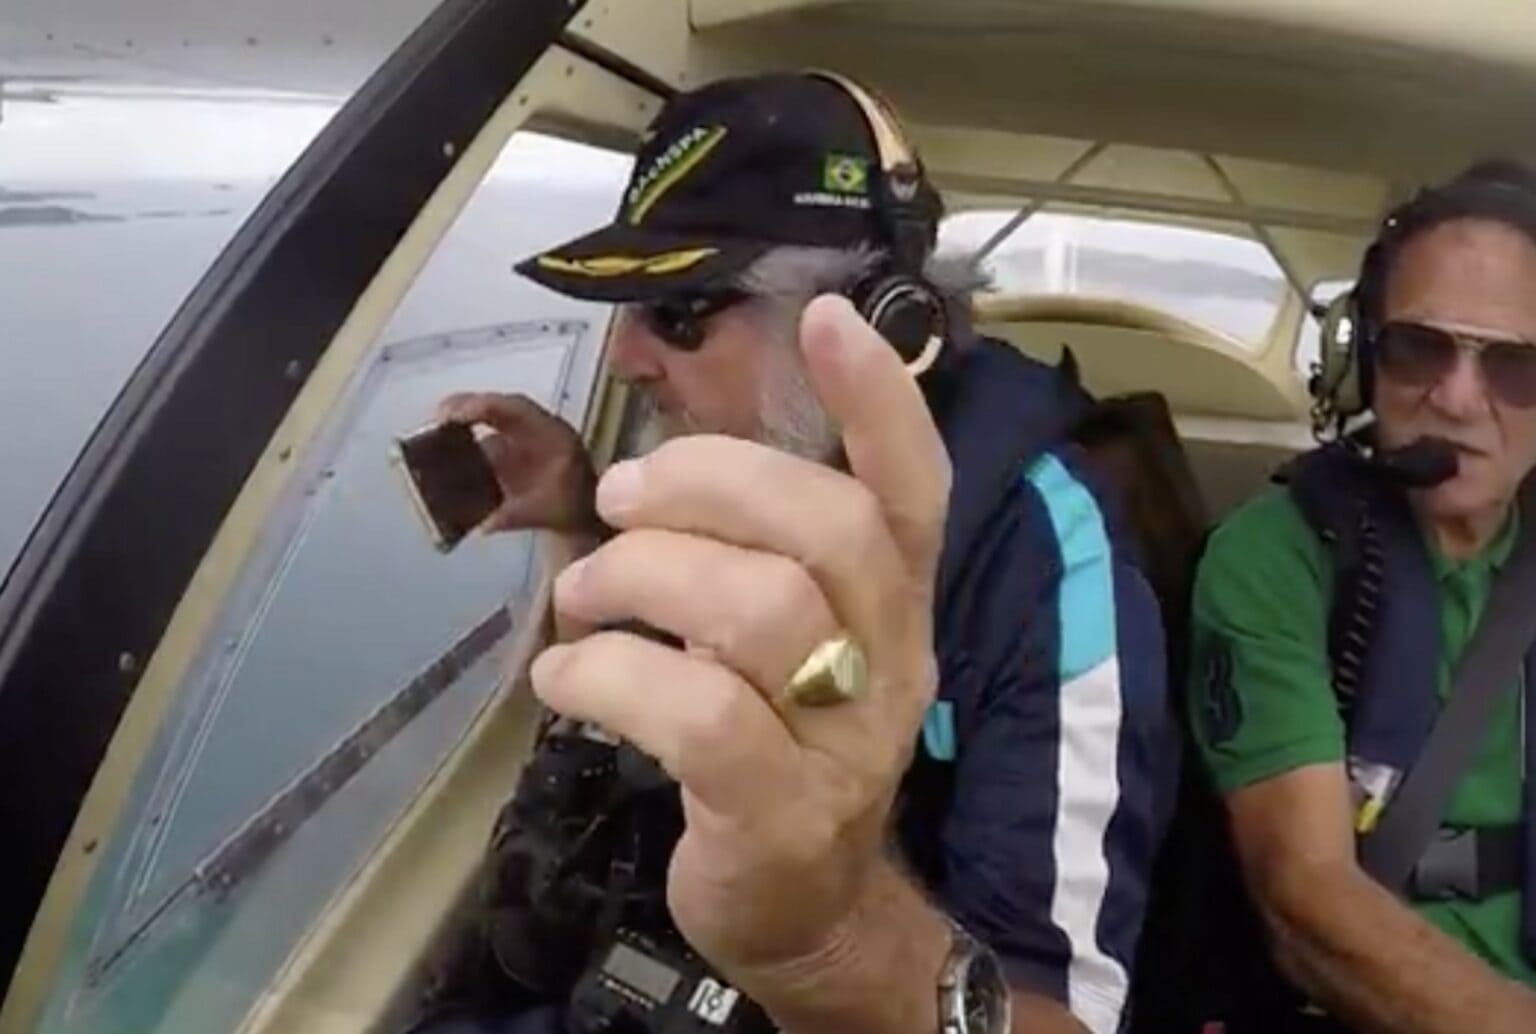 iPhone dropped out of plane